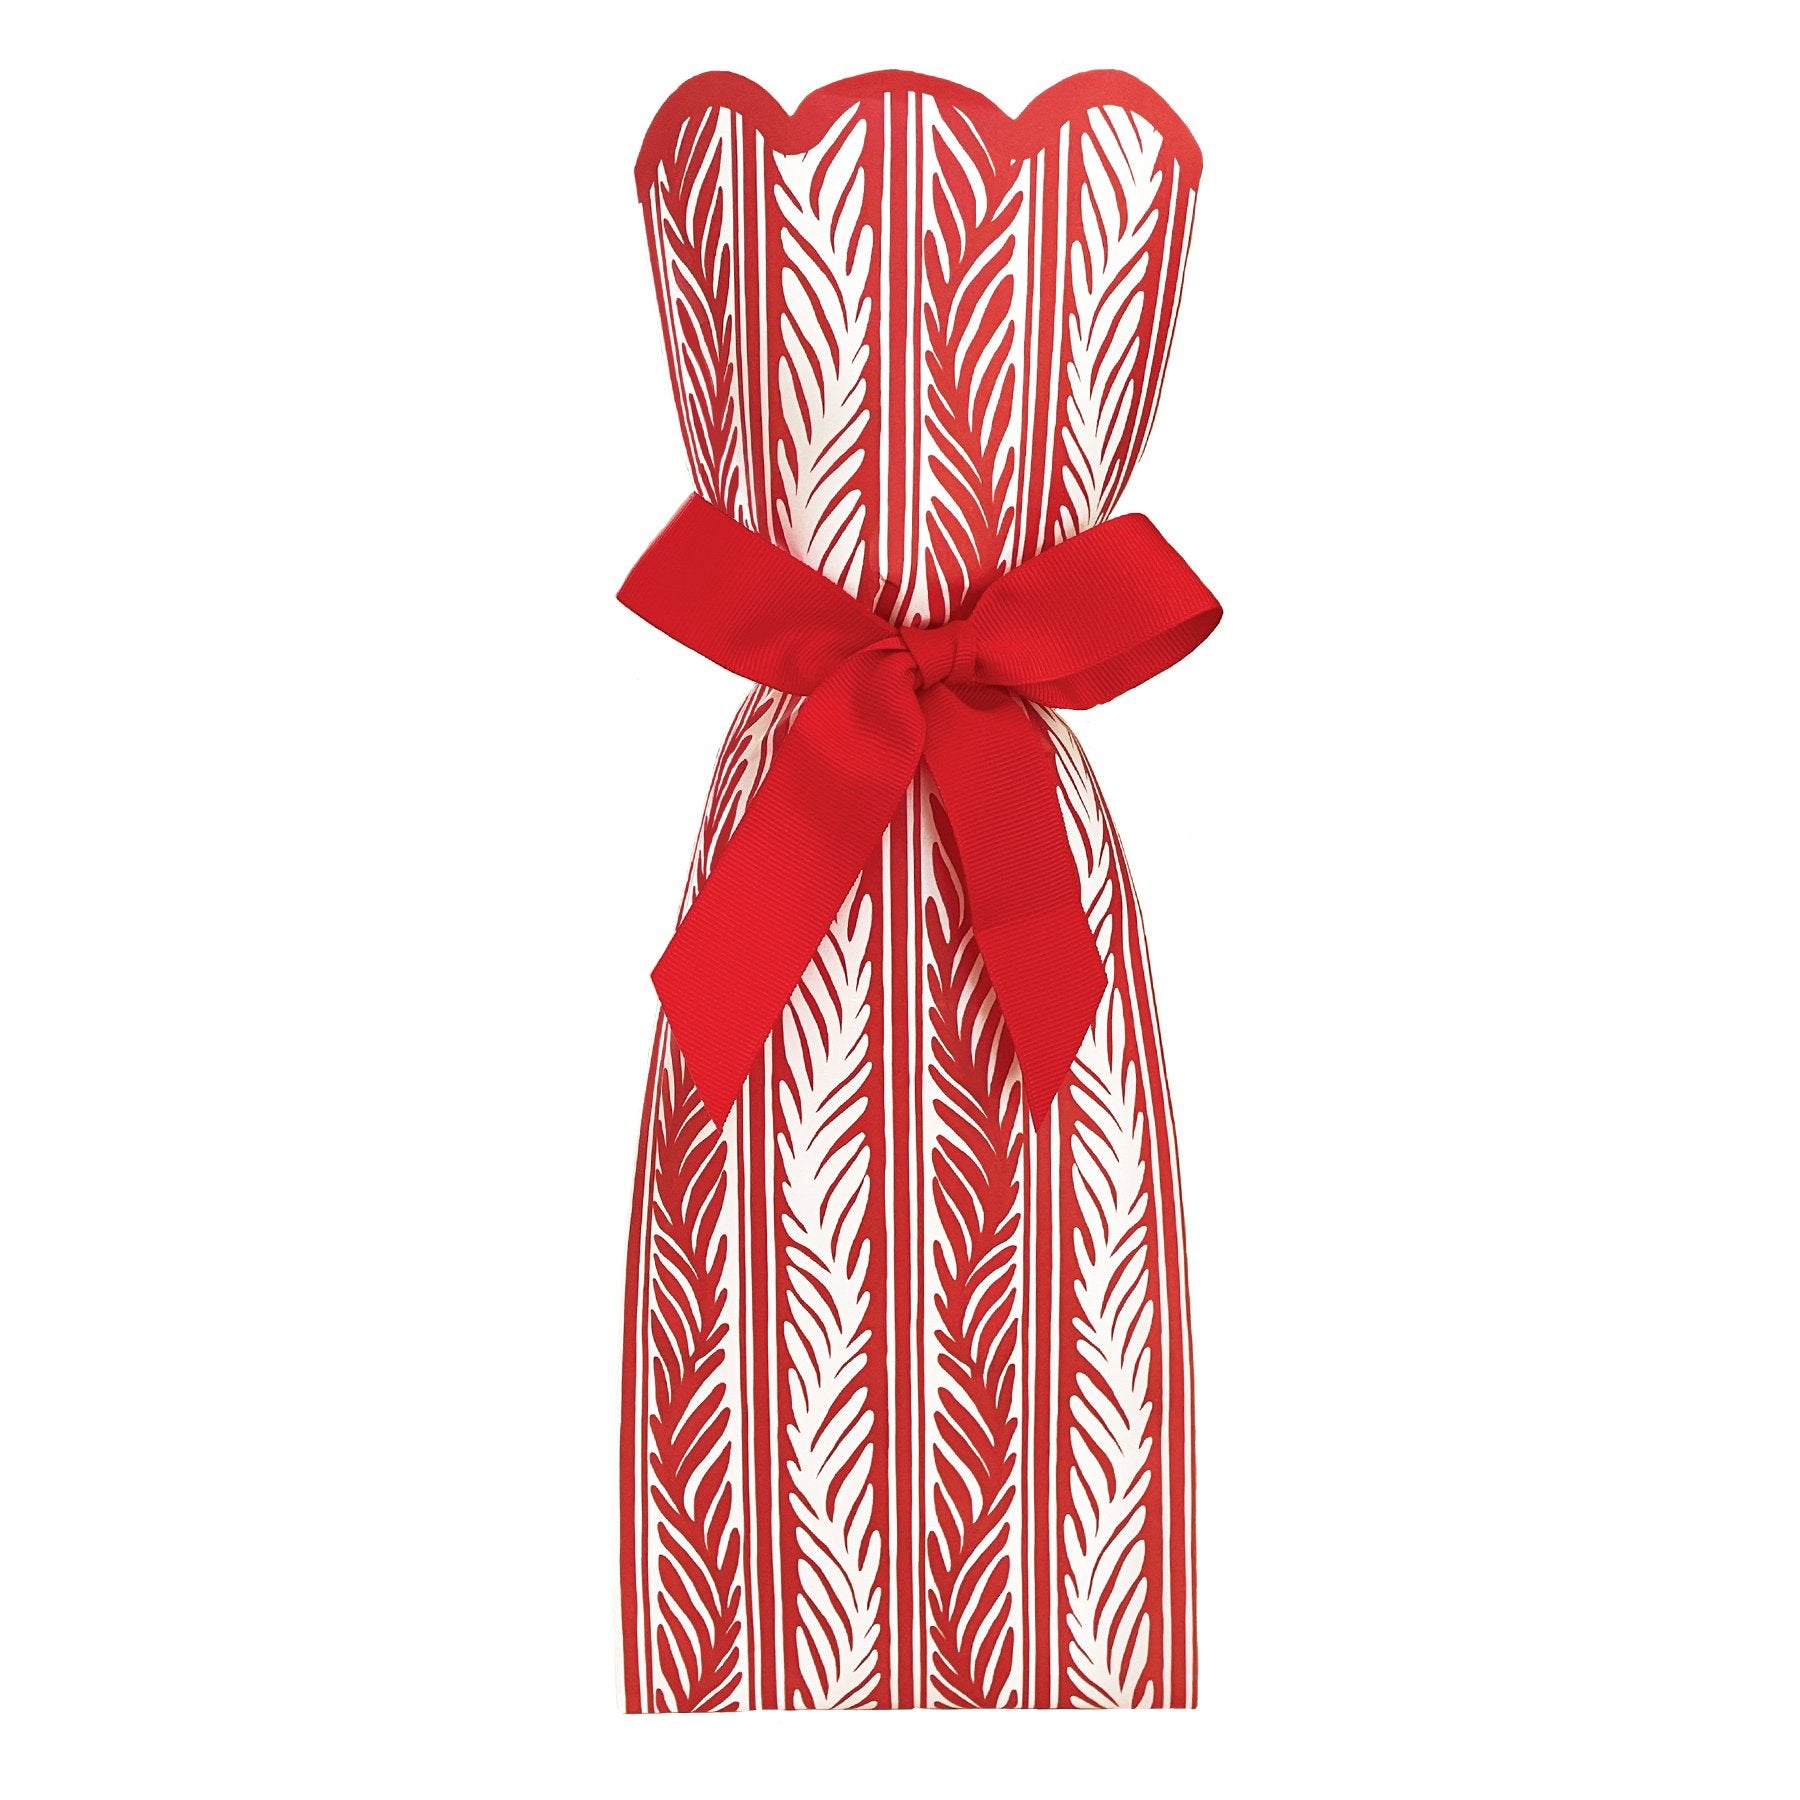 Paper wine bag featuring a red and white vine pattern and red bow